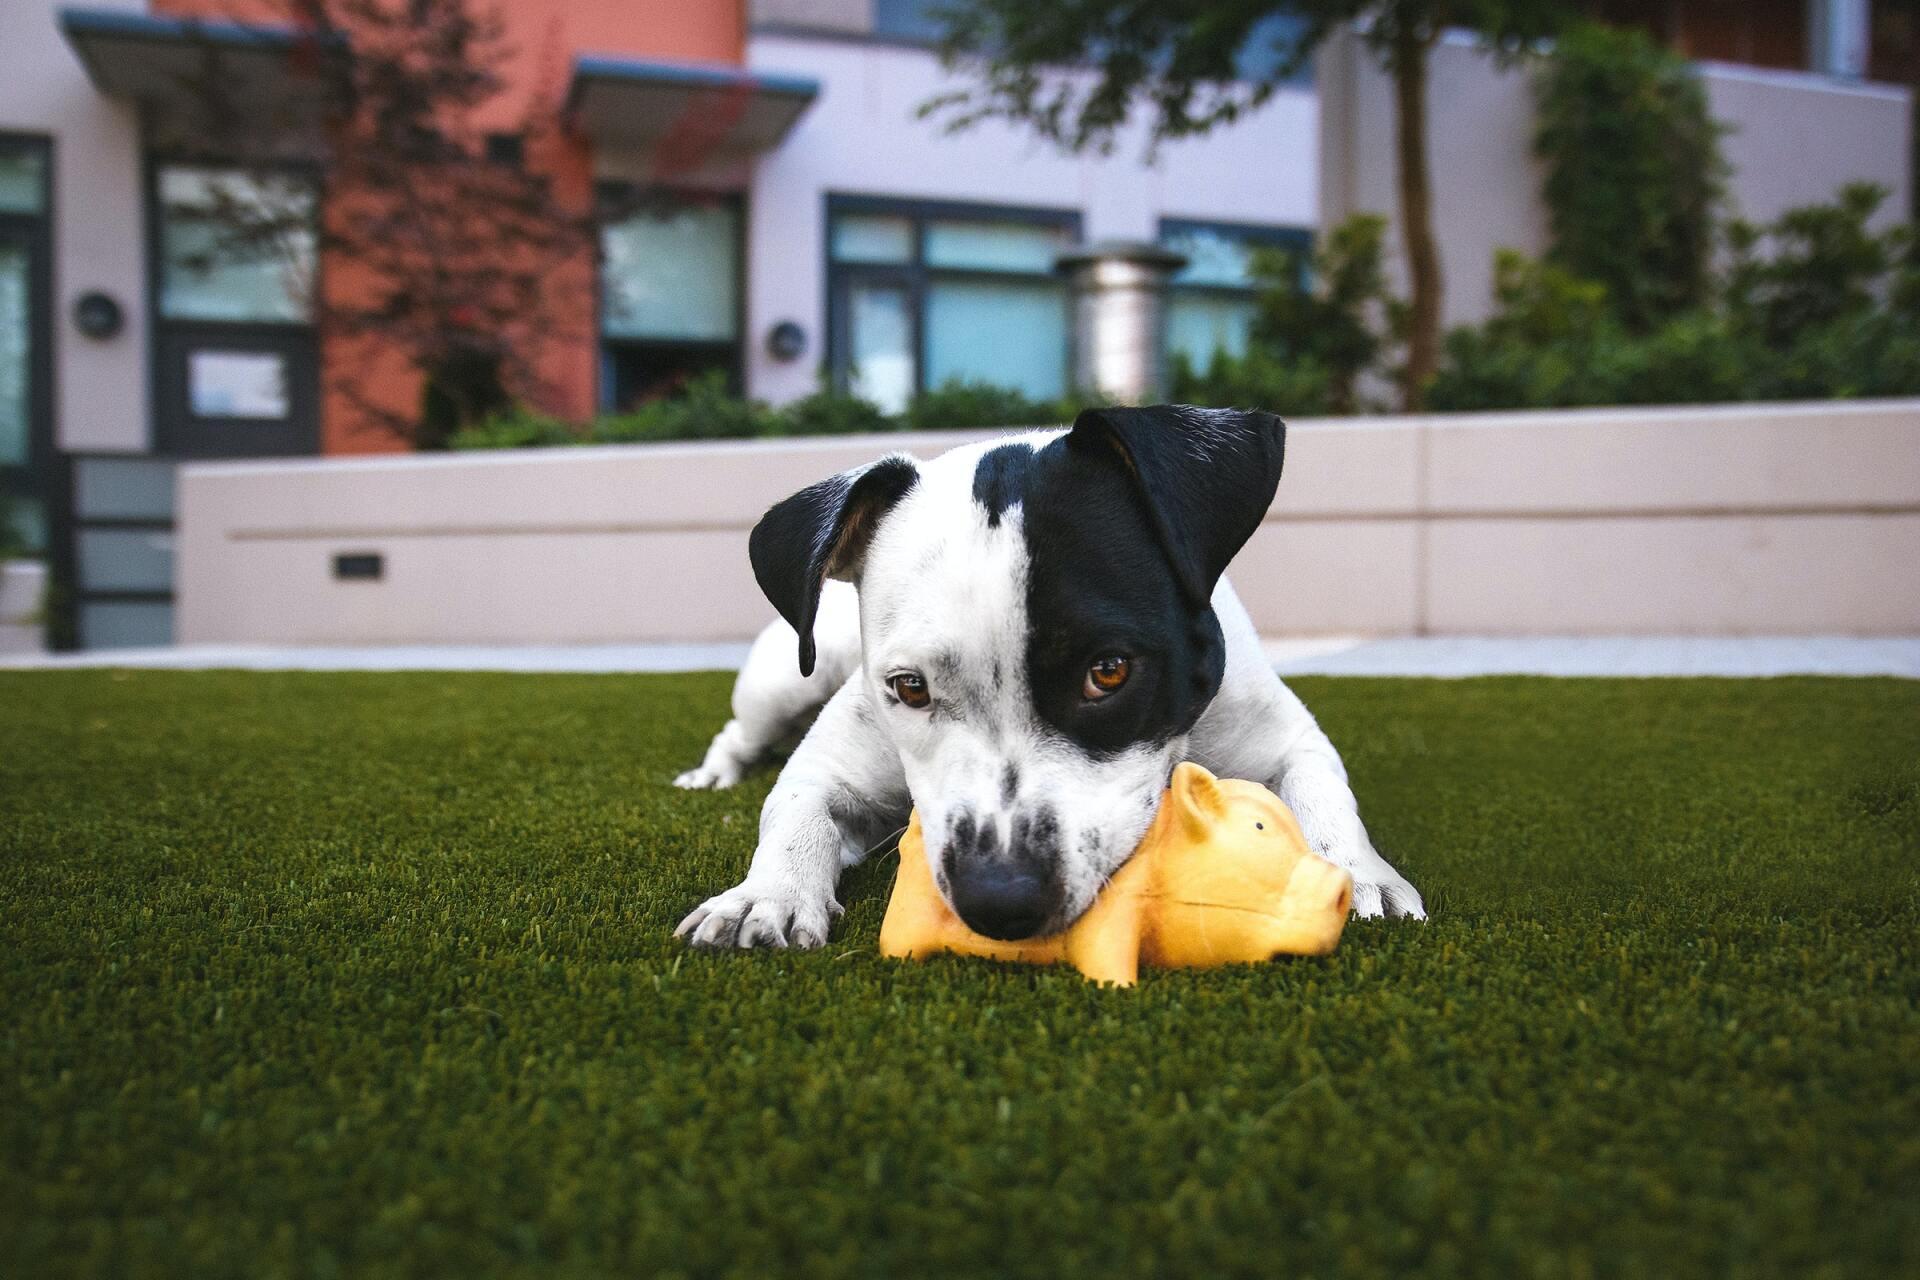 Your dog can play and roll as much as he wants on synthetic grass designed specifically for dogs. For ruff-tough synthetic turf, no play time is too crazy or too rough.